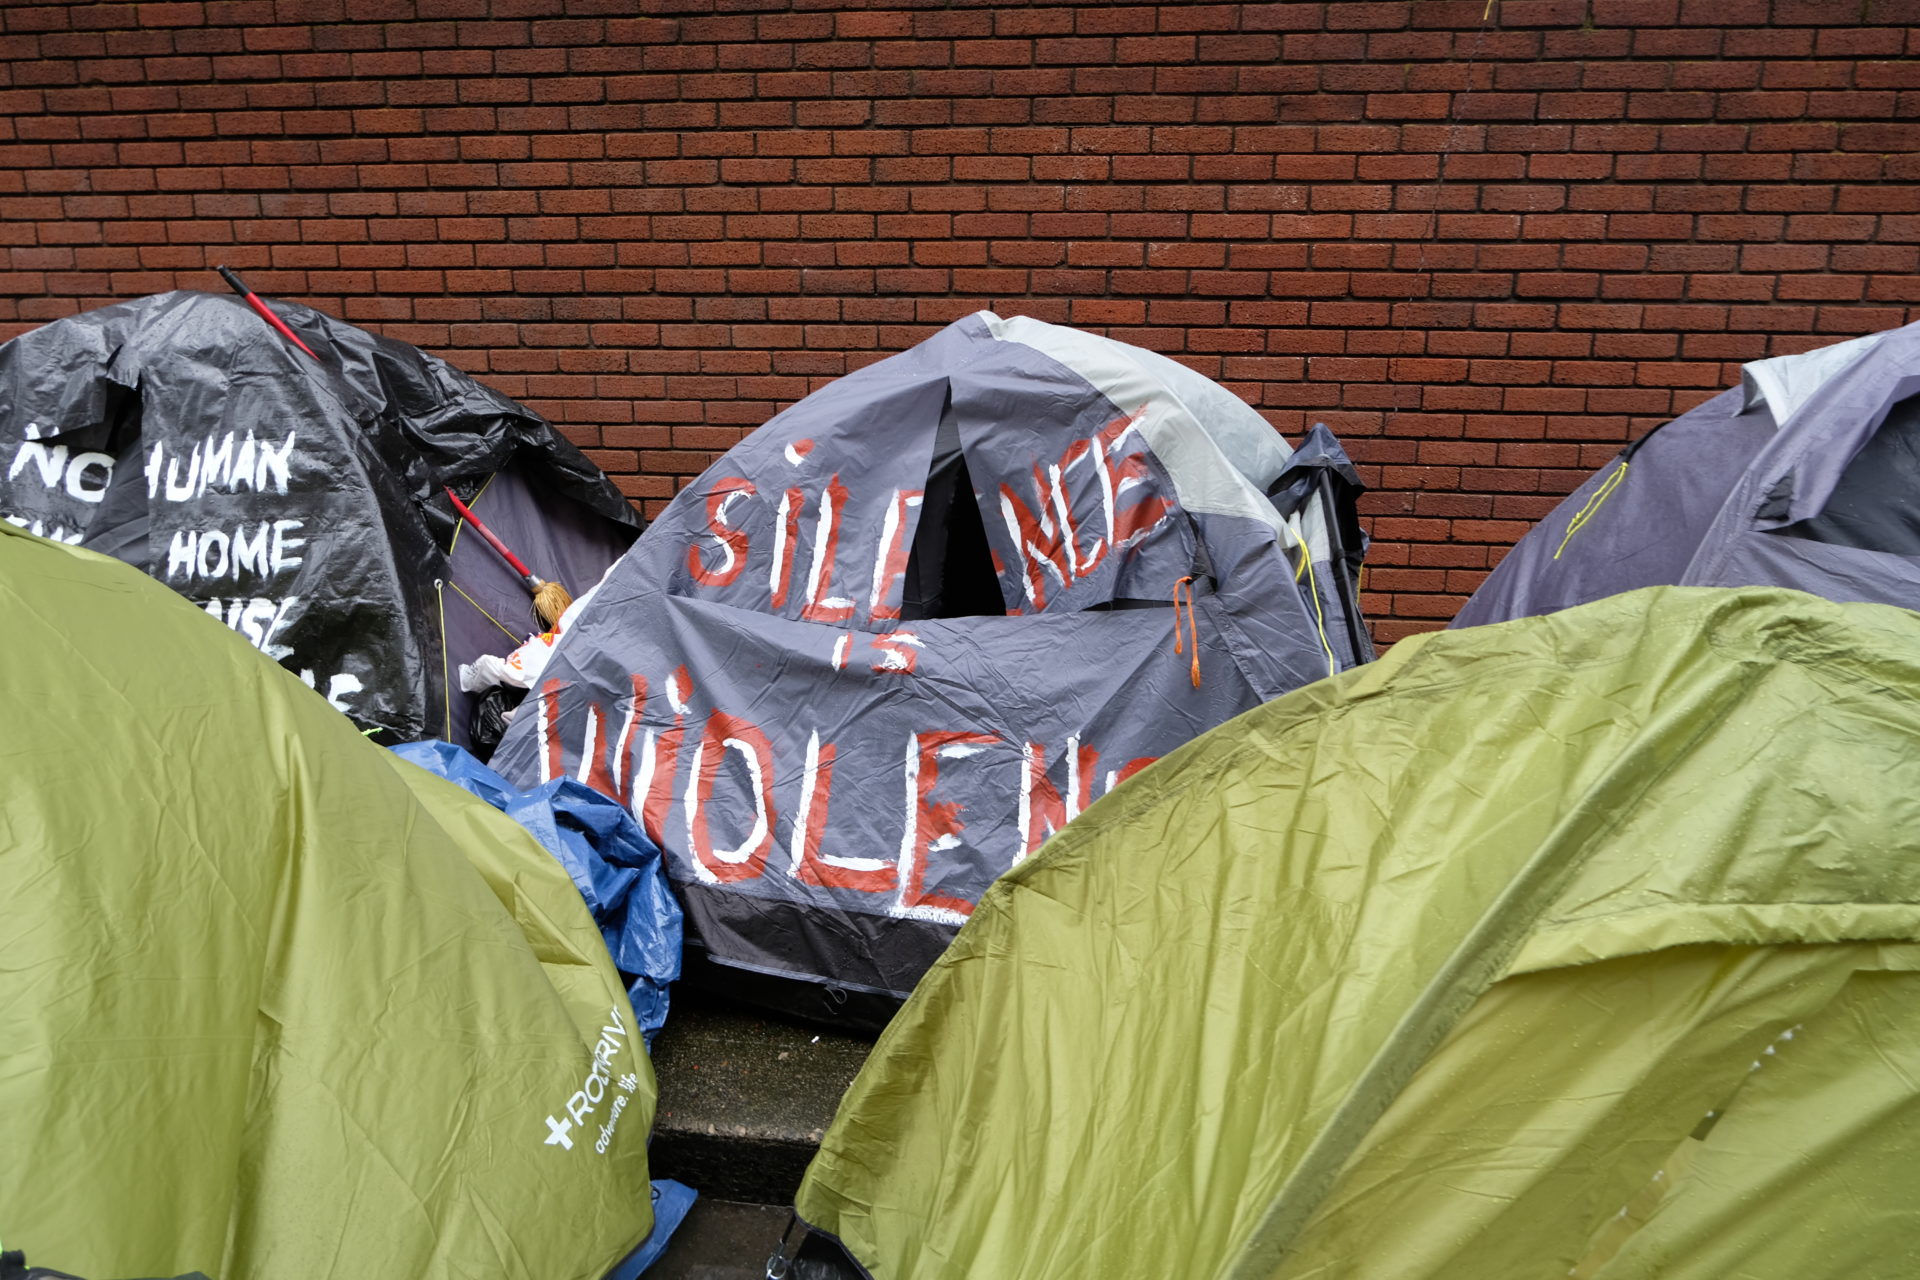 An abandoned tent outside the International Protection Office previously used by an asylum seeker that has been slashed. Photo by Rory Chinn